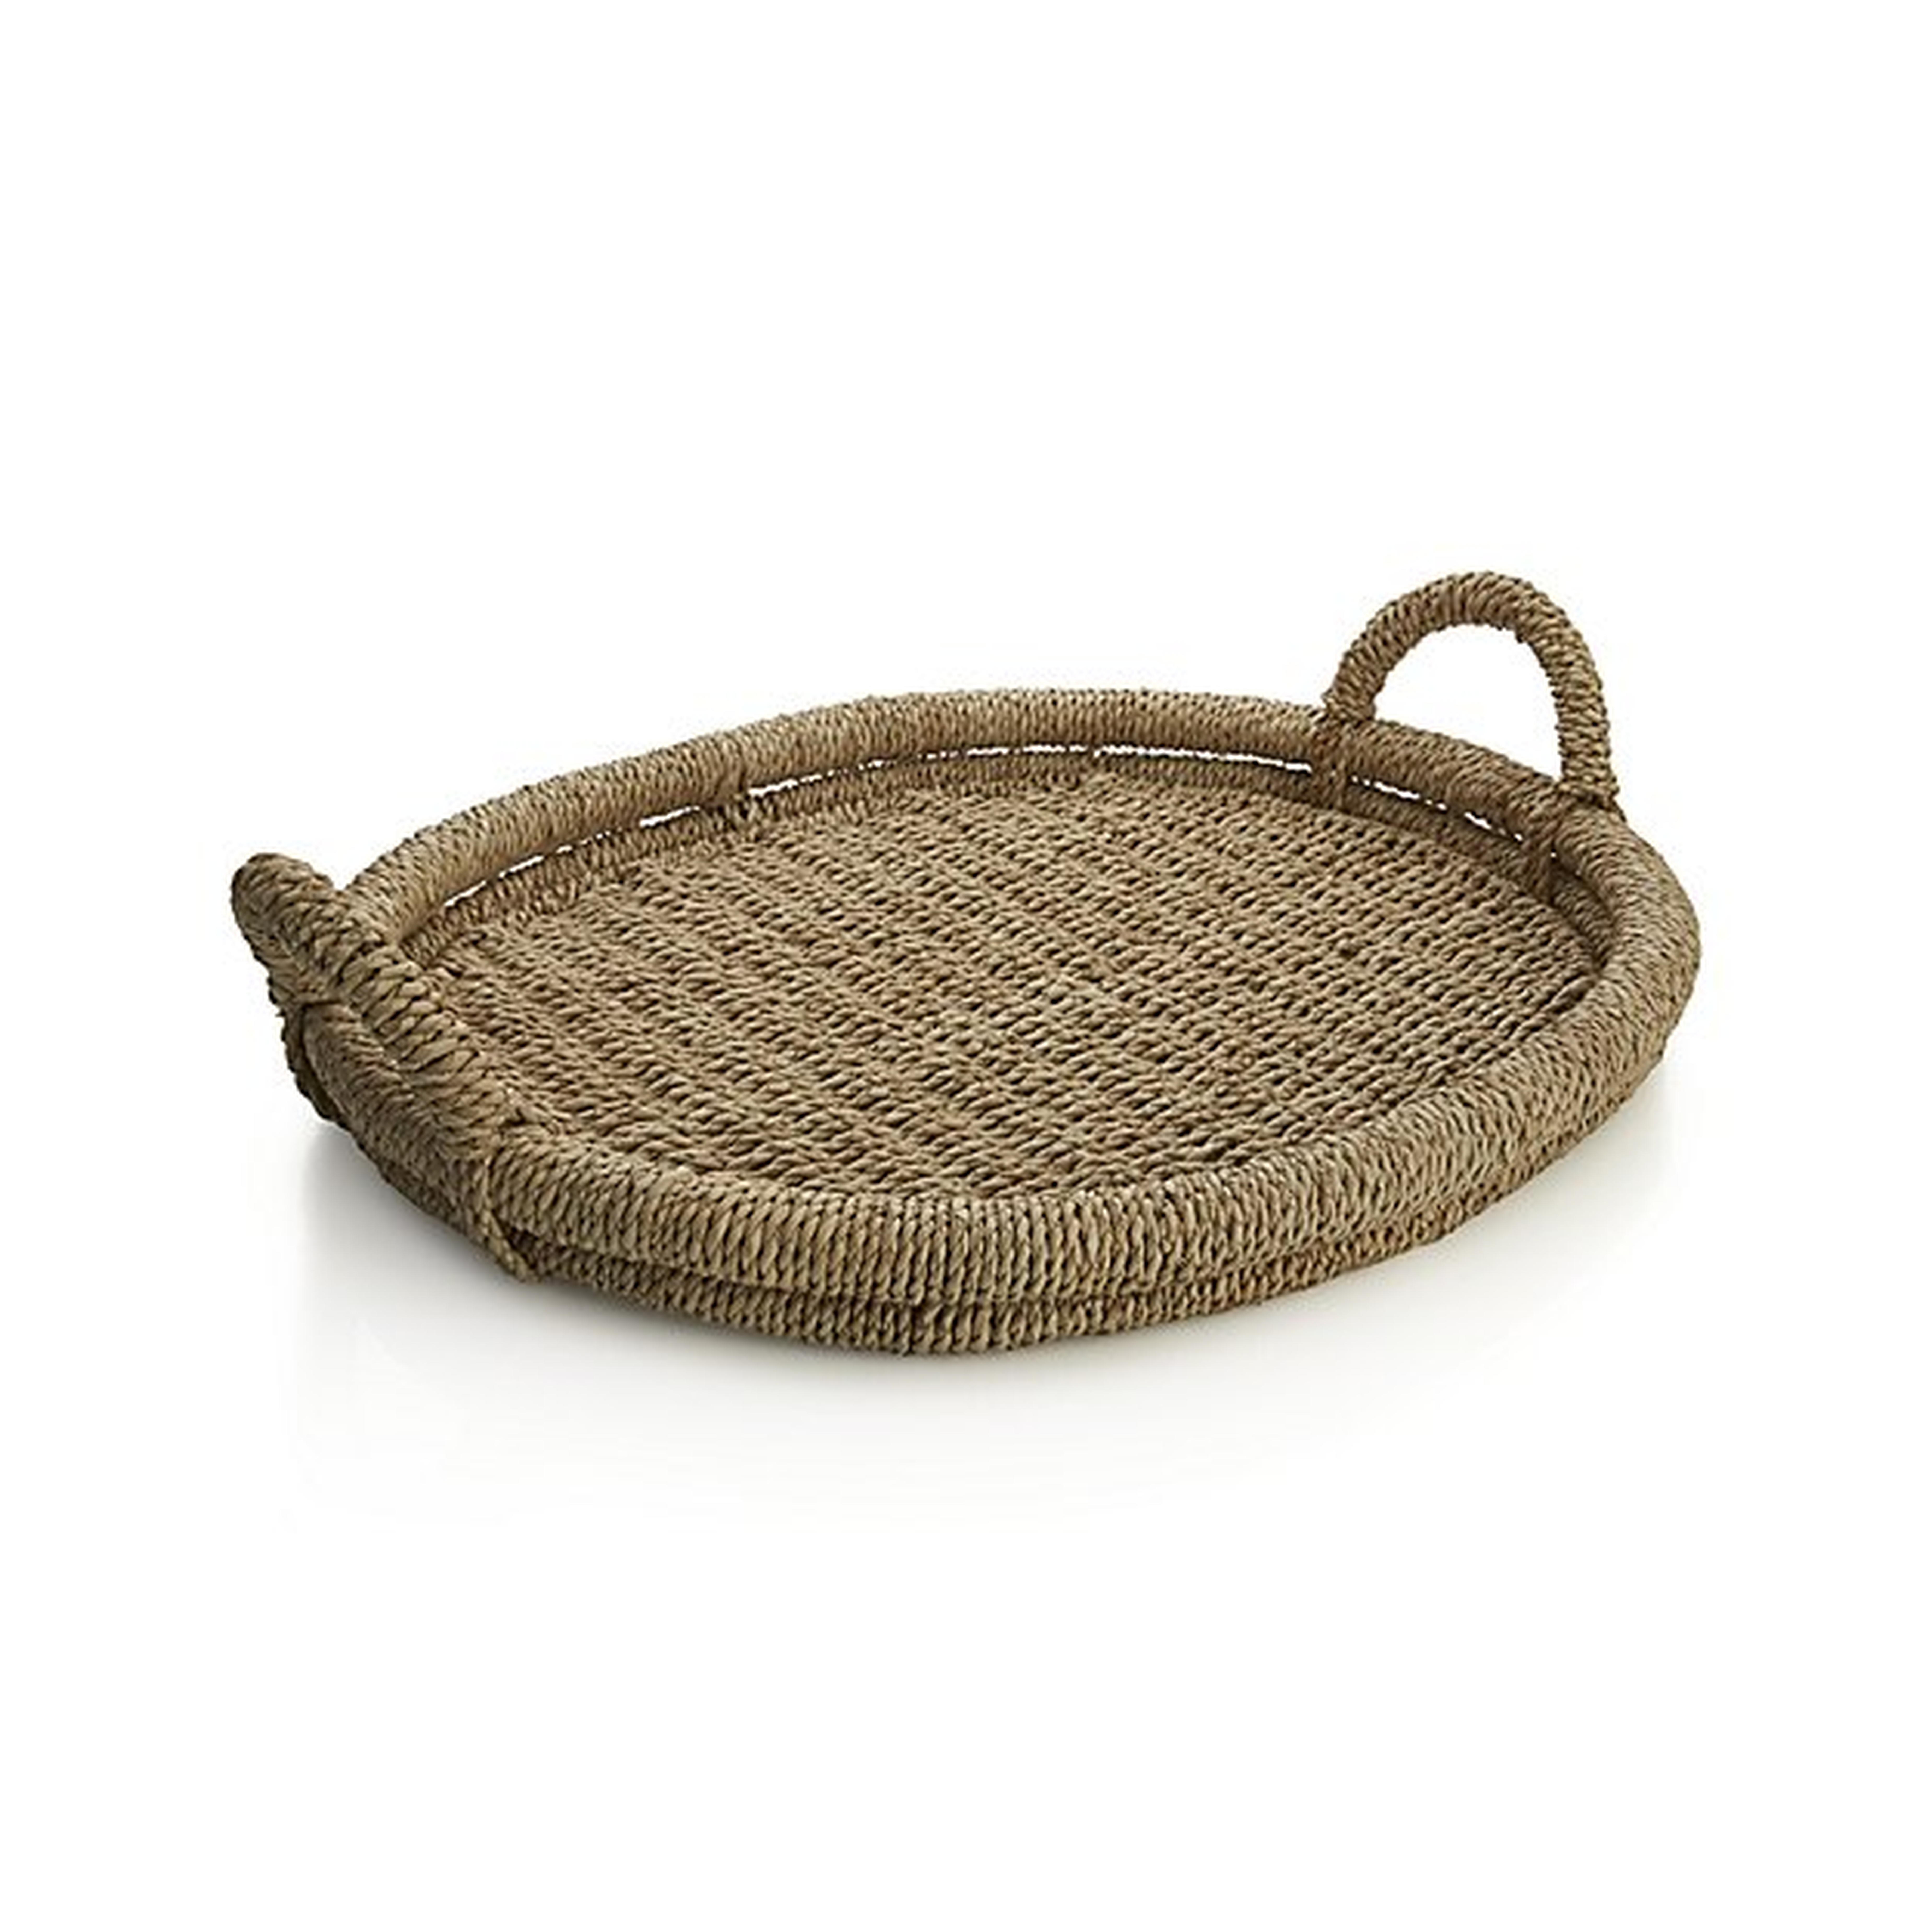 Reijay Oval Tray - Crate and Barrel